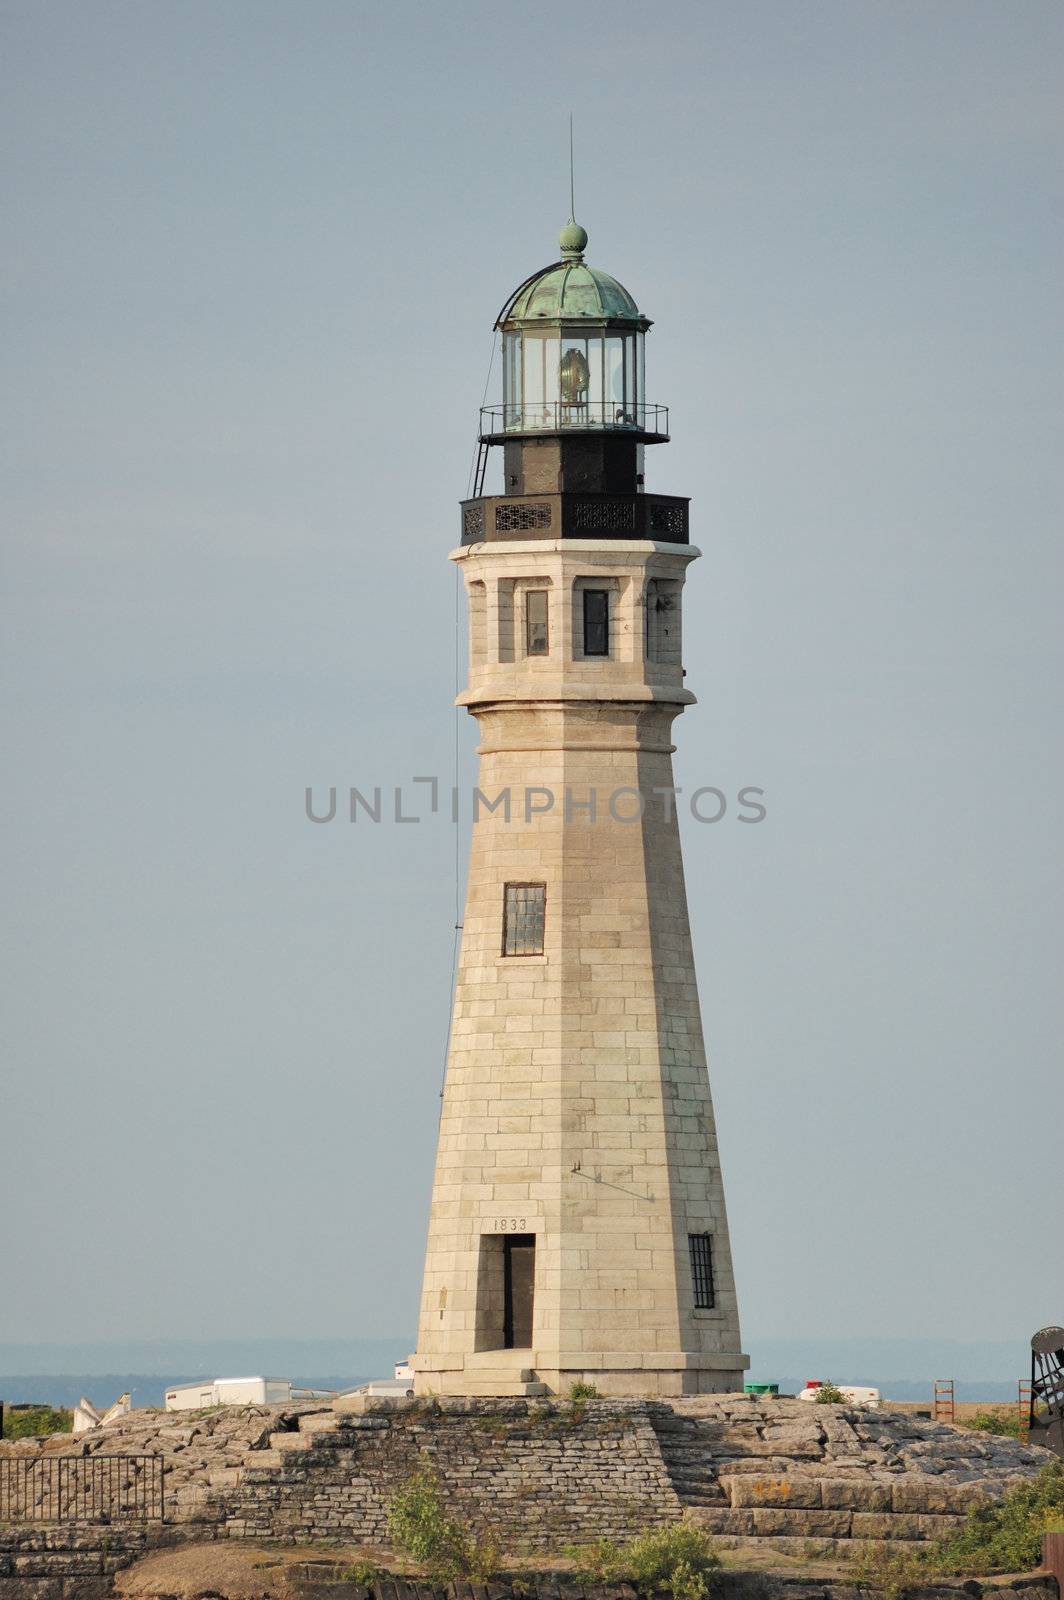 Buffalo Main Lighthouse, This tower is located directly across from the Erie Basin Marina, underneath the Skyway in downtown Buffalo.